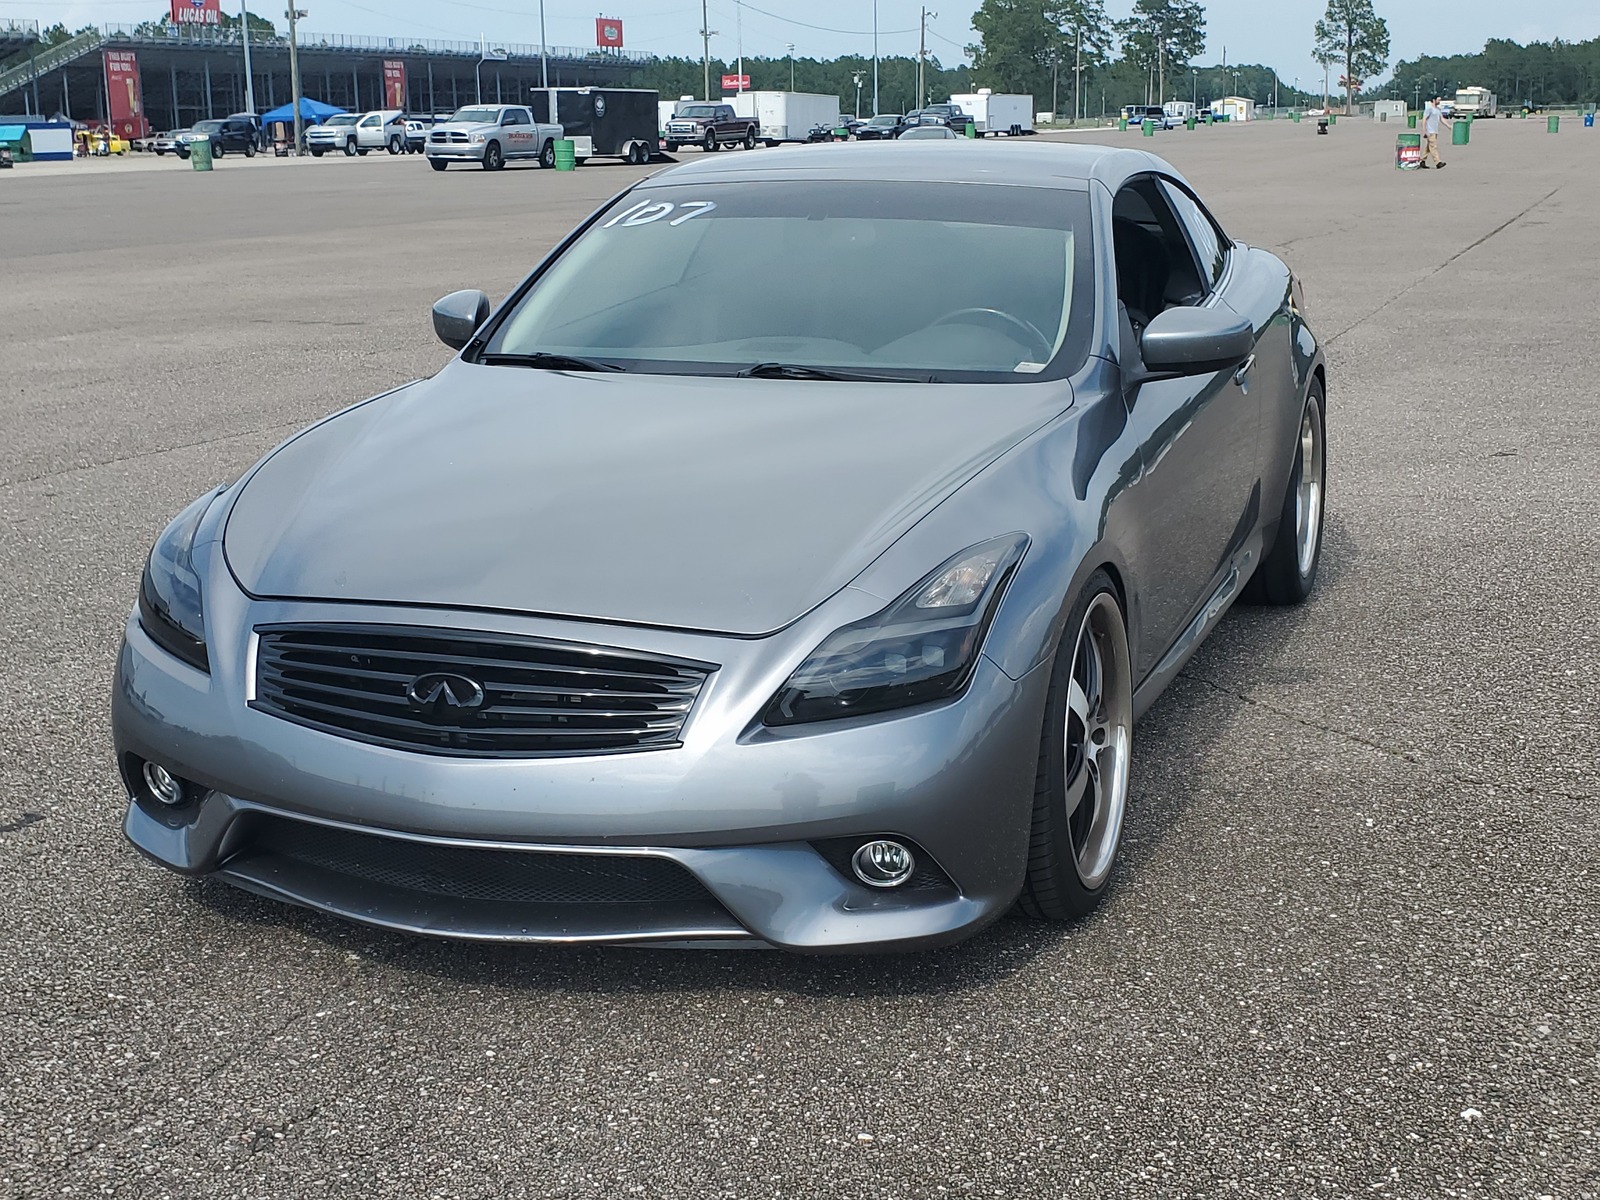 2010 Silver Infiniti G37 S Convertible picture, mods, upgrades